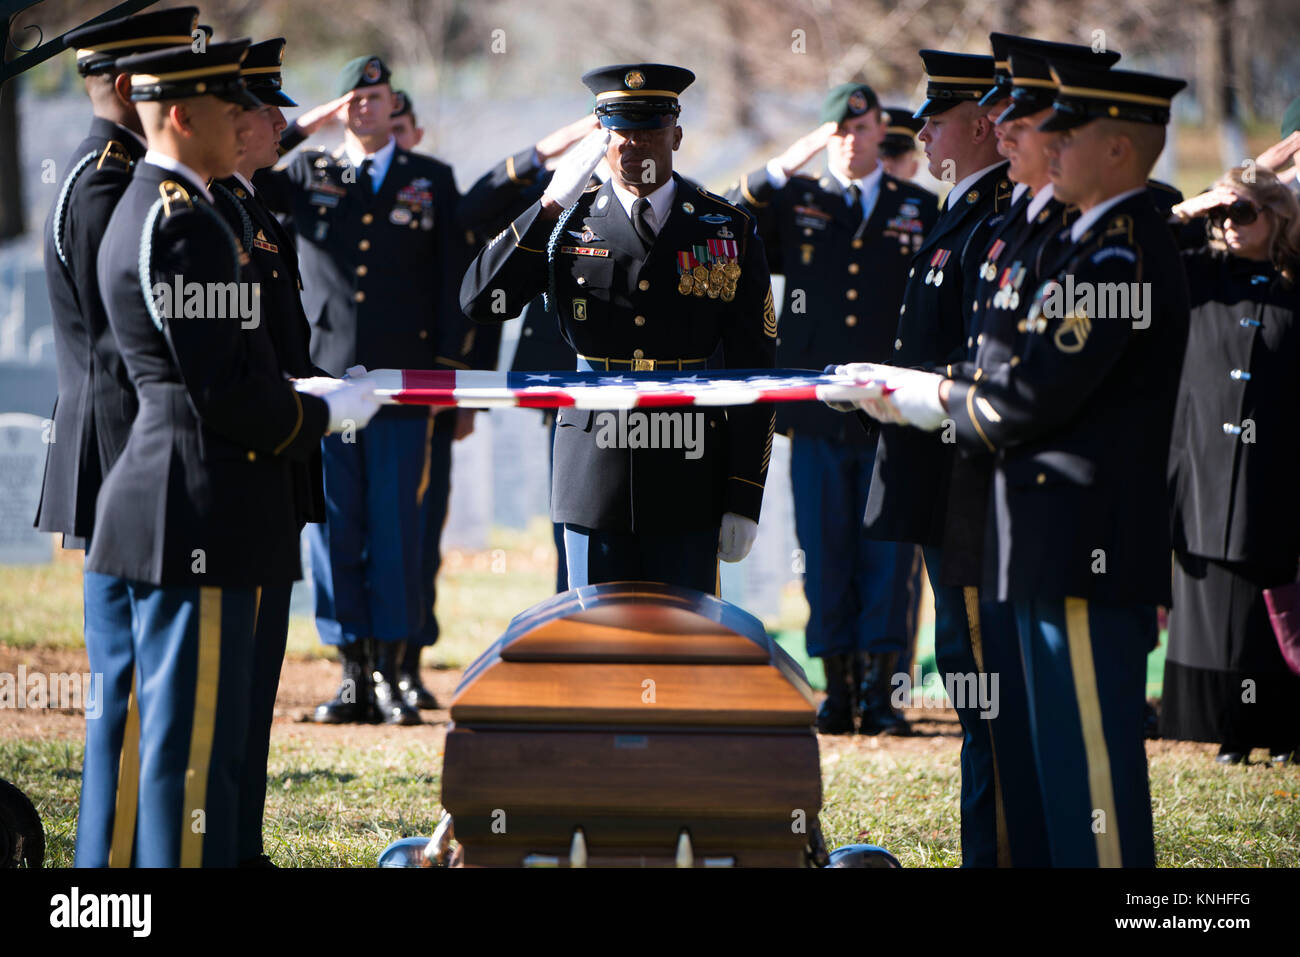 U.S. soldiers hold a flag over the casket of deceased Special Forces soldier James Moriarty during a graveside service at the Arlington National Cemetery December 5, 2016 in Arlington, Virginia. Moriarty was one of three Special Forces soldiers killed in Jordan in November.(photo by Rache Larue  via Planetpix) Stock Photo